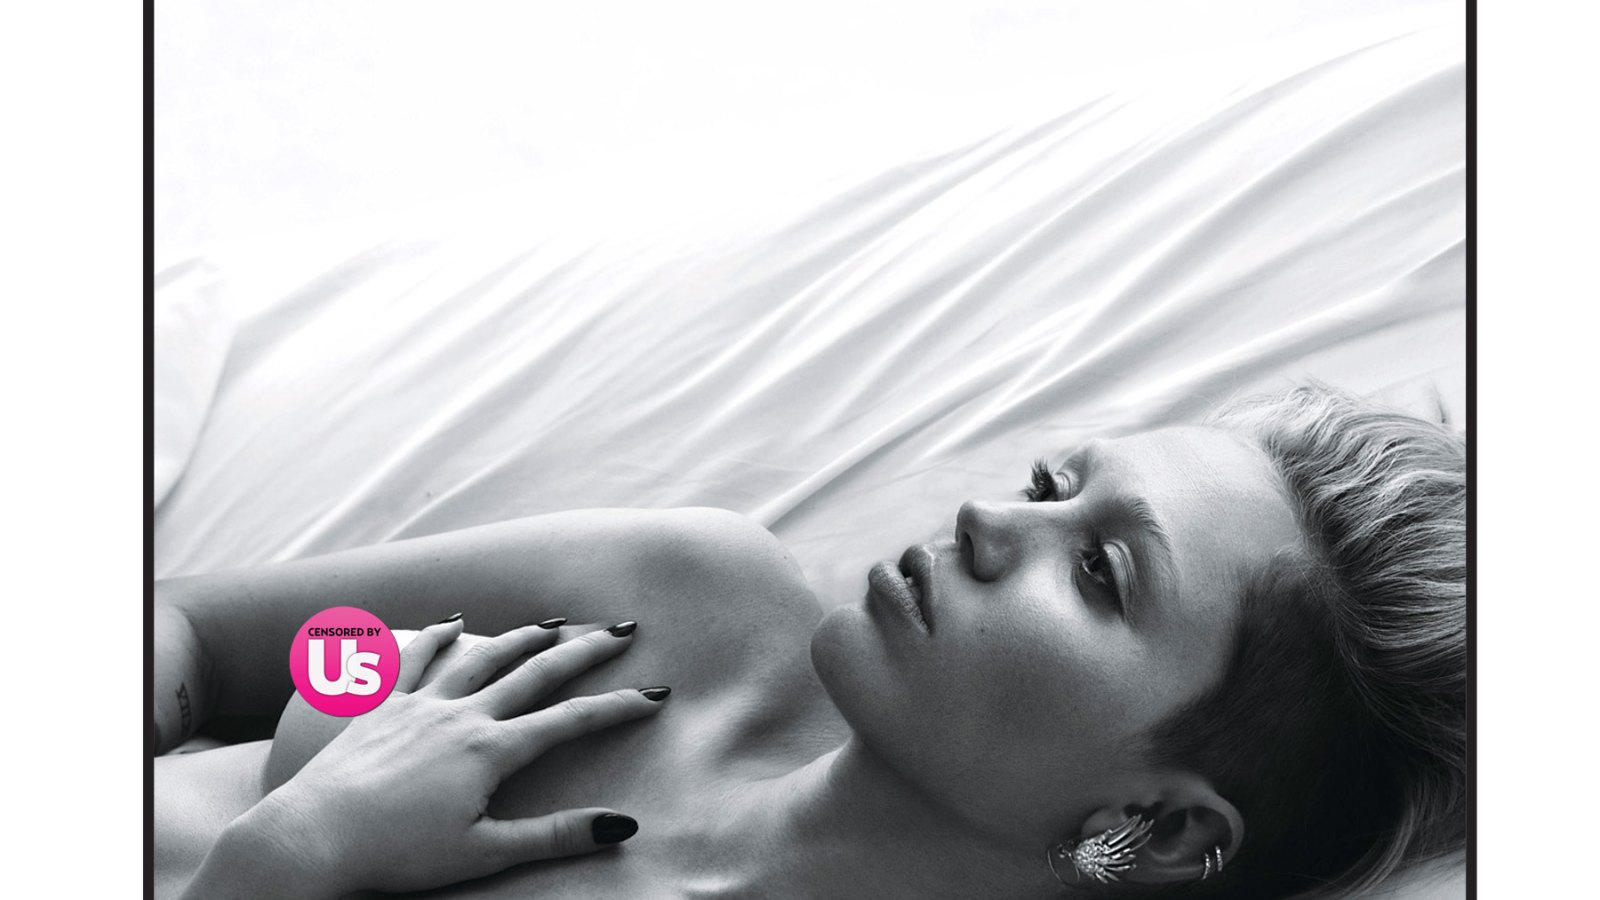 Miley Cyrus poses topless for W magazine